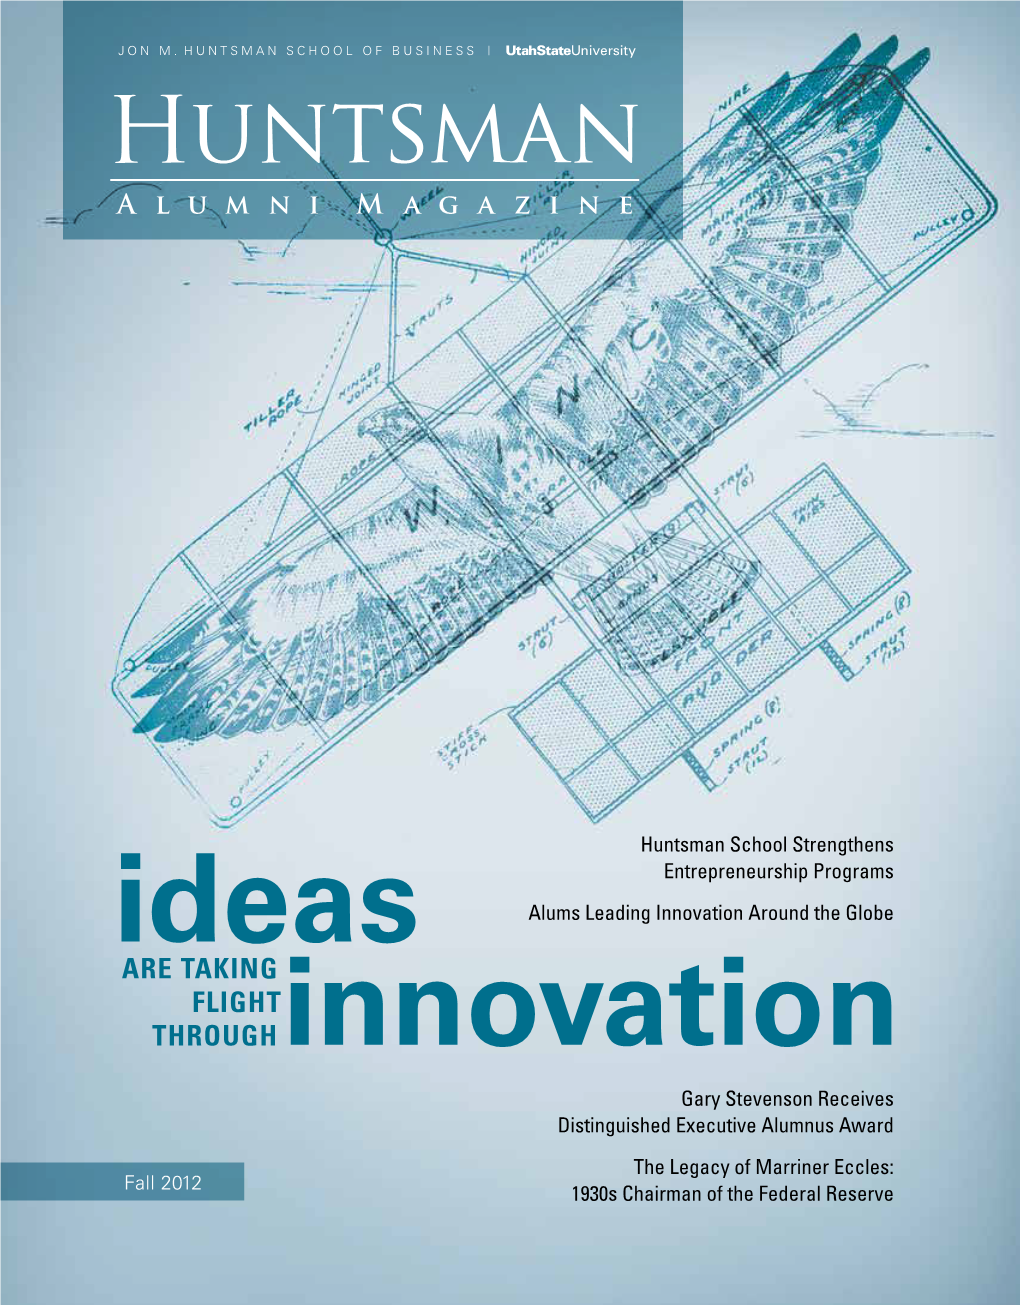 Fall 2012 1930S Chairman of the Federal Reserve CONTENTS: the Innovation Issue CONTRIBUTORS